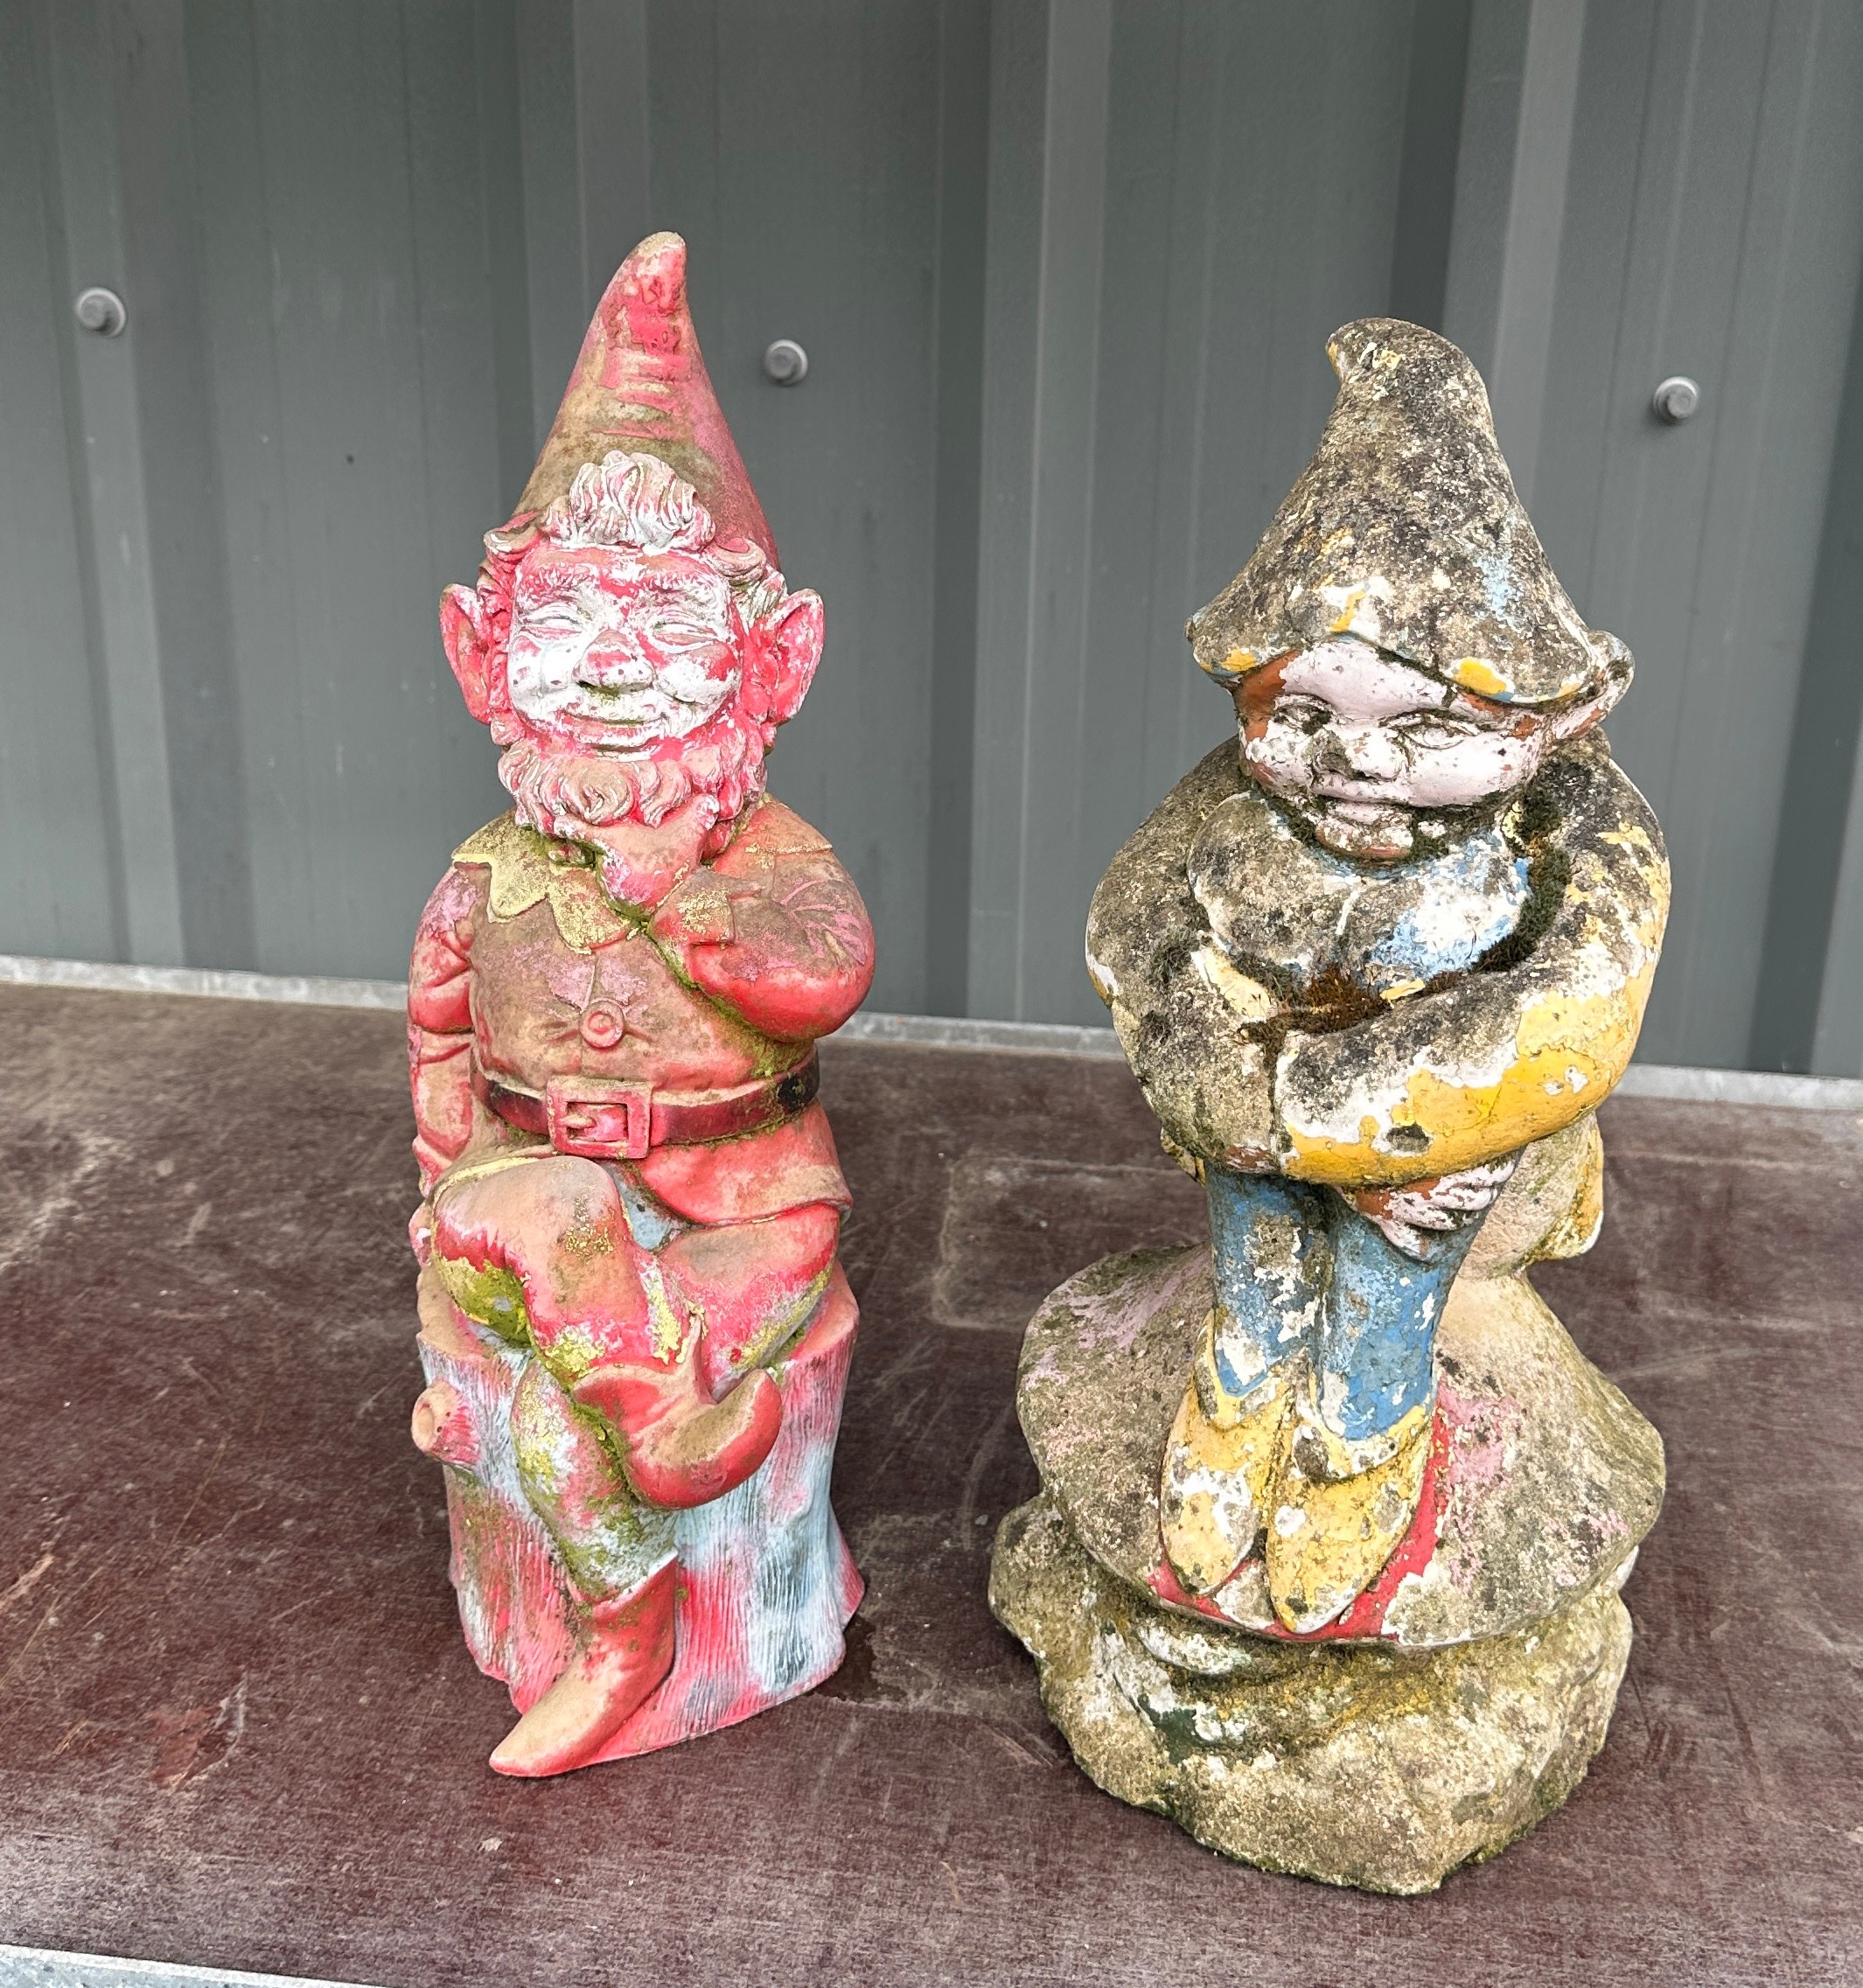 Two garden gnomes overall height of largest 15 inches tall - Image 3 of 3